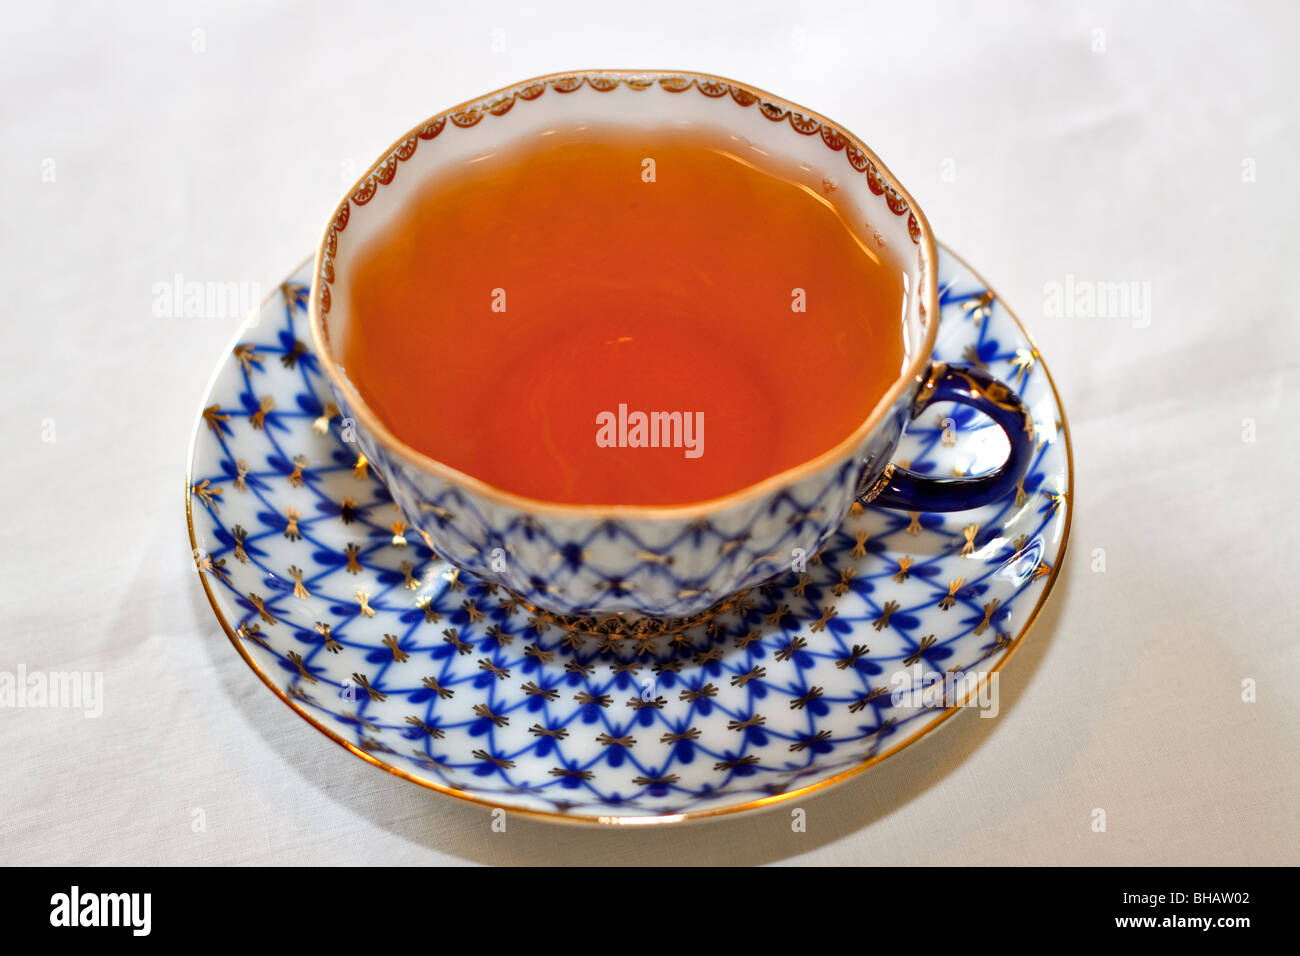 A cup of tea in a fine porcelain cup and saucer Stock Photo